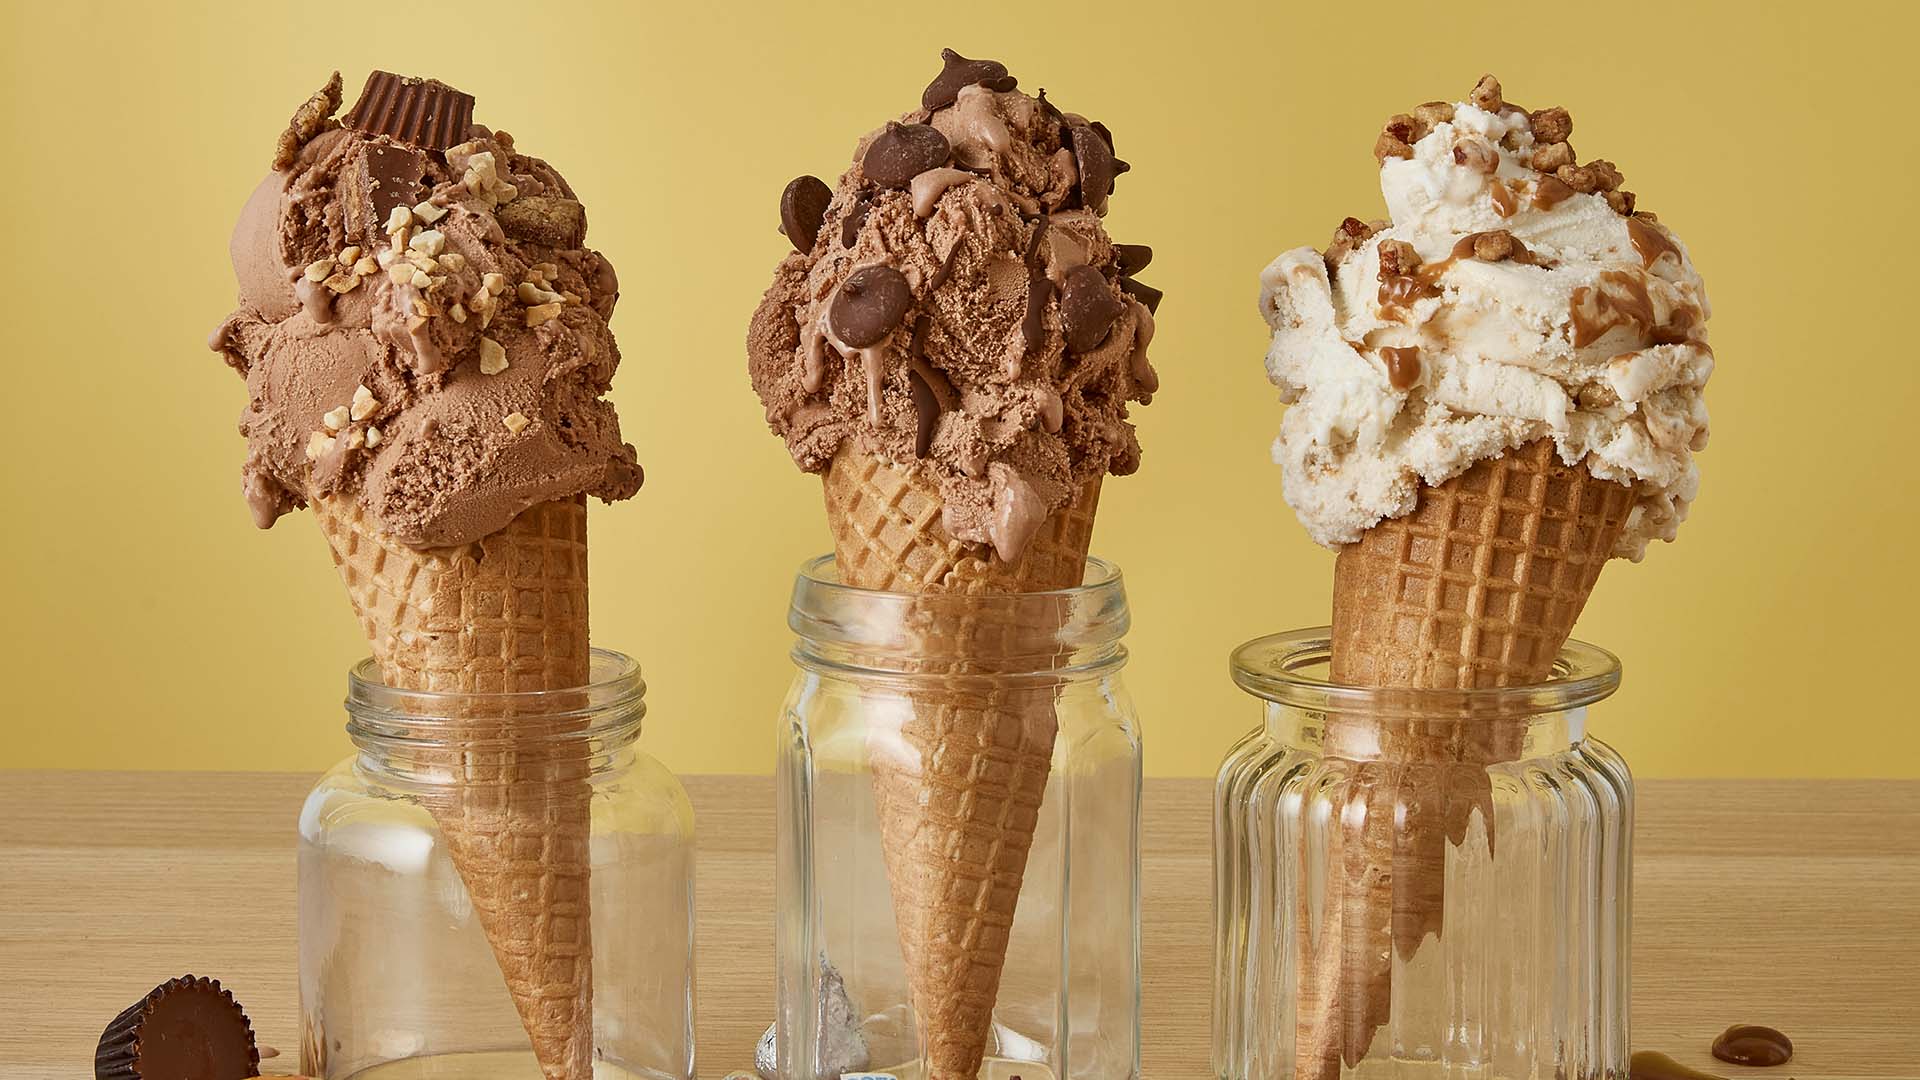 Gelatissimo Is Serving Up Gelato Made with Reese's Peanut Butter Cups and Hershey's Kisses